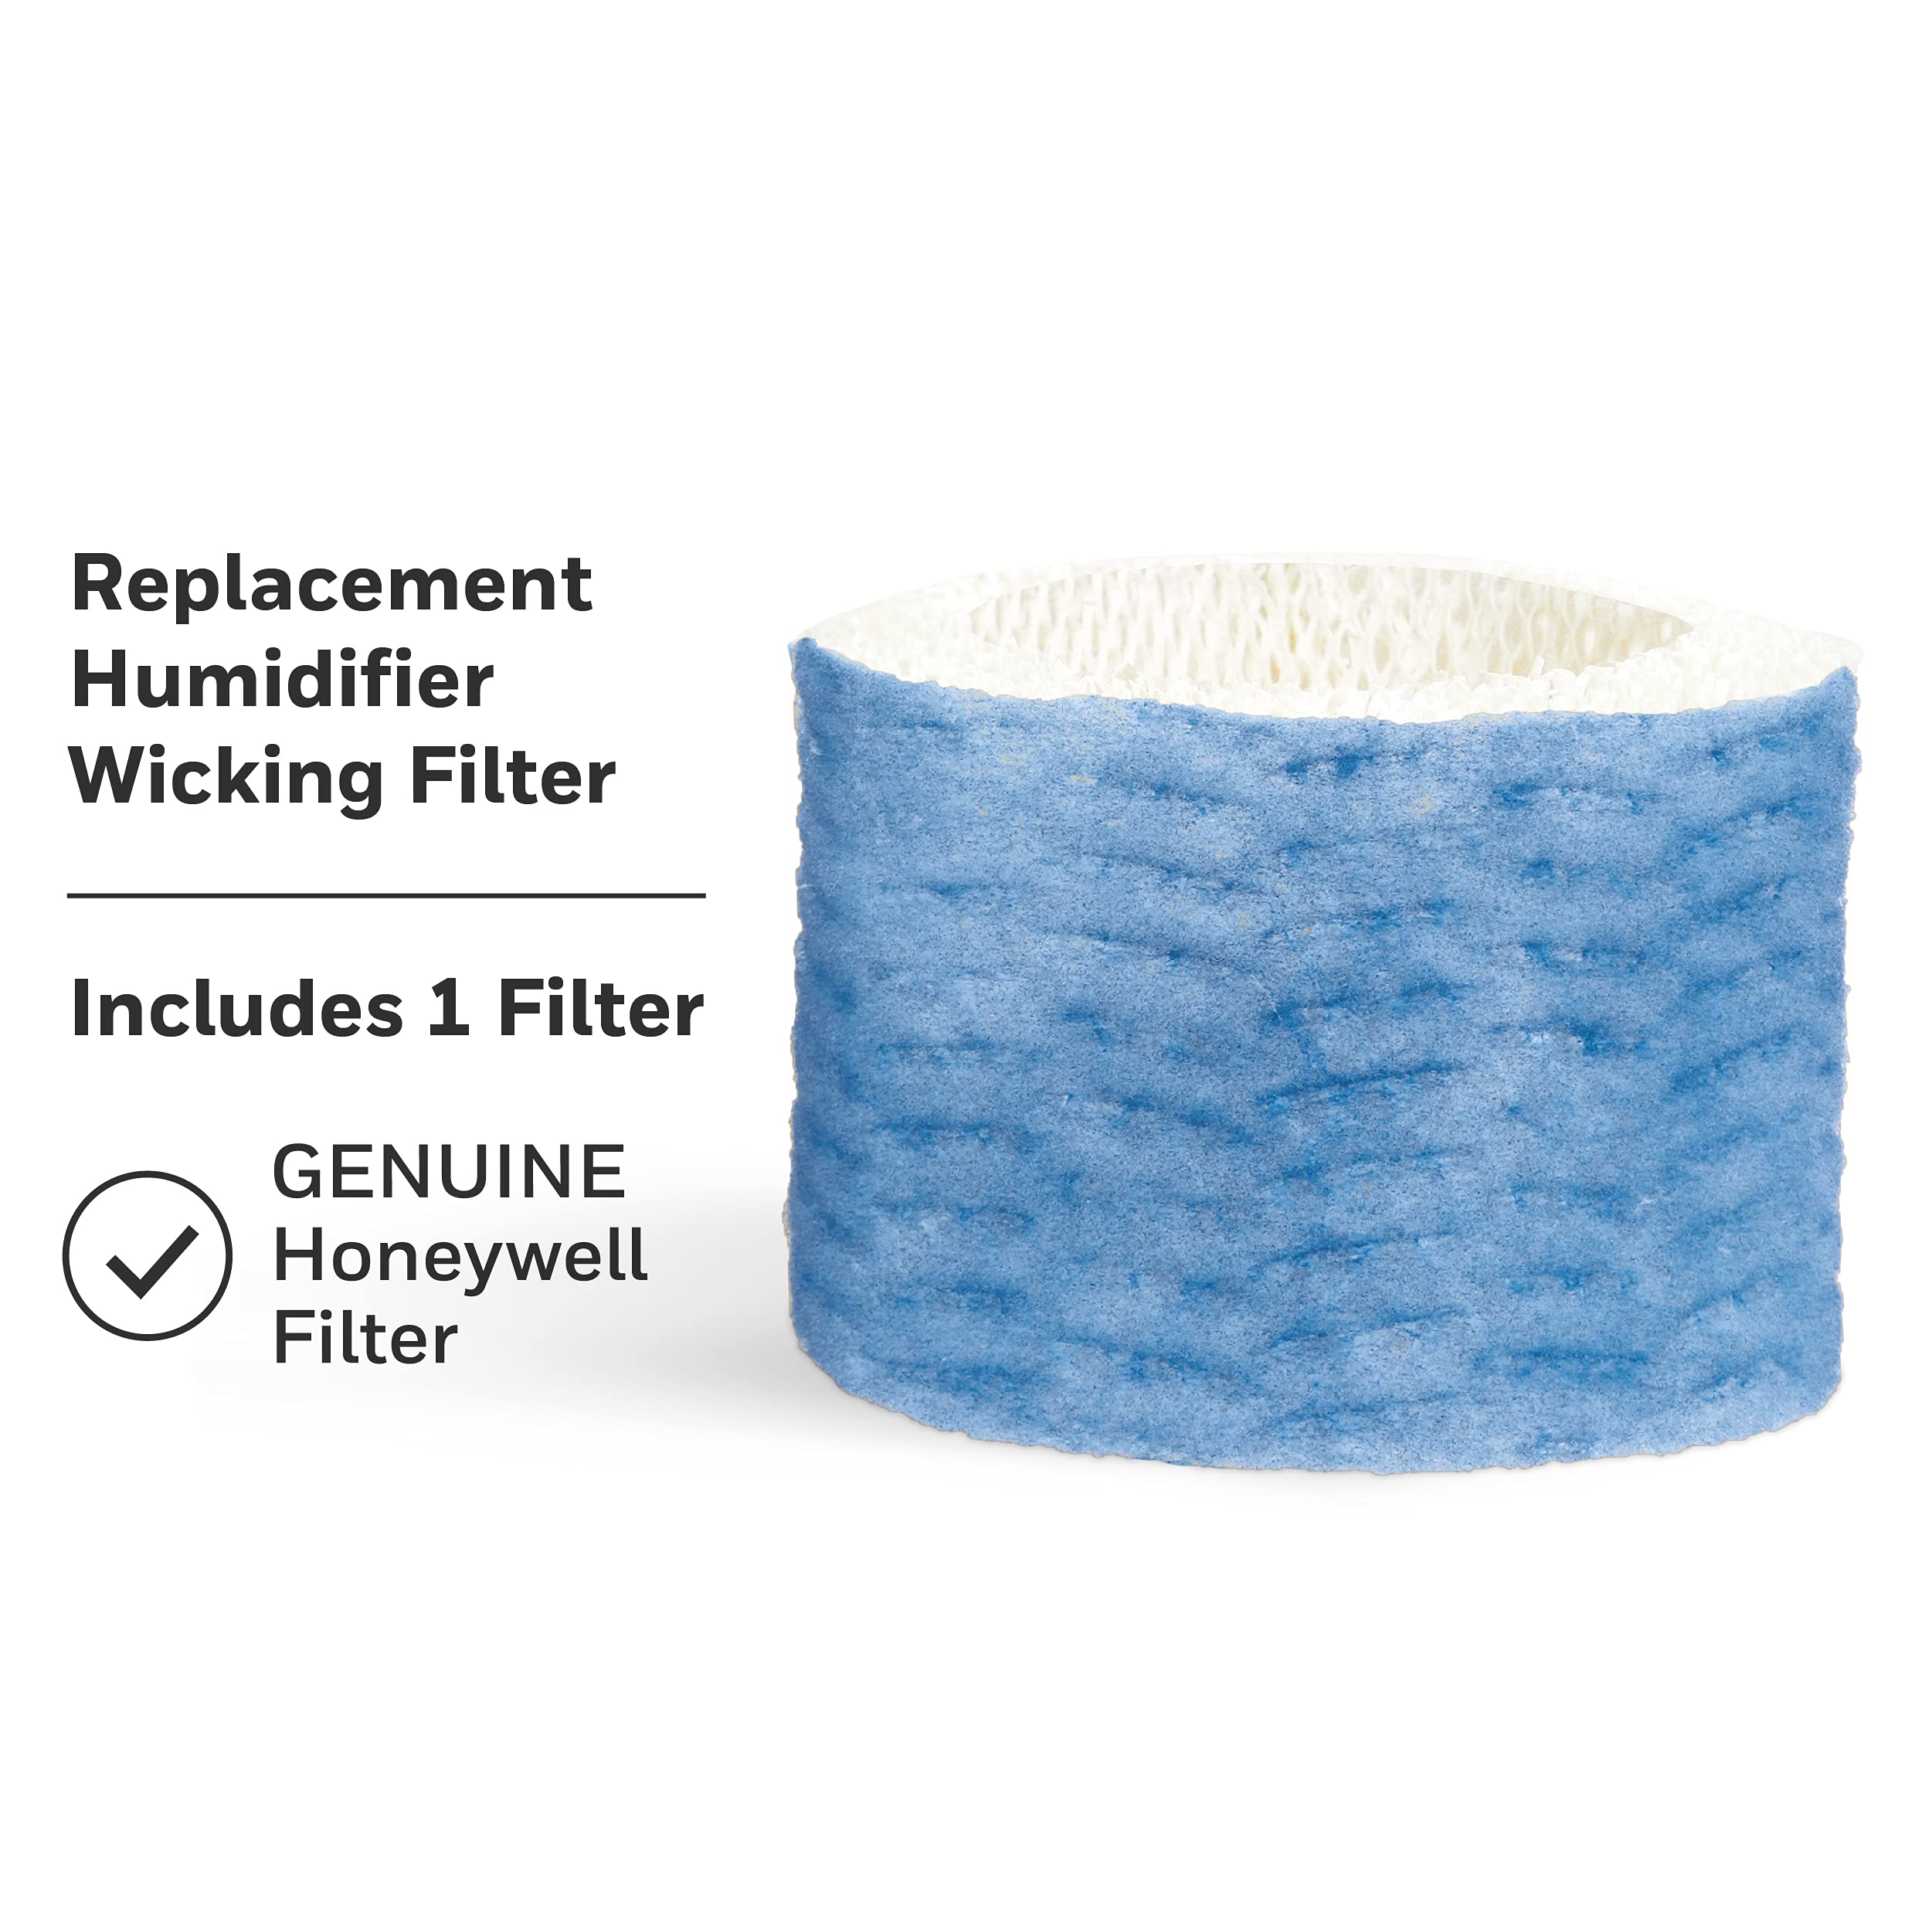 Honeywell Replacement Wicking Filter A, 1 Pack, White